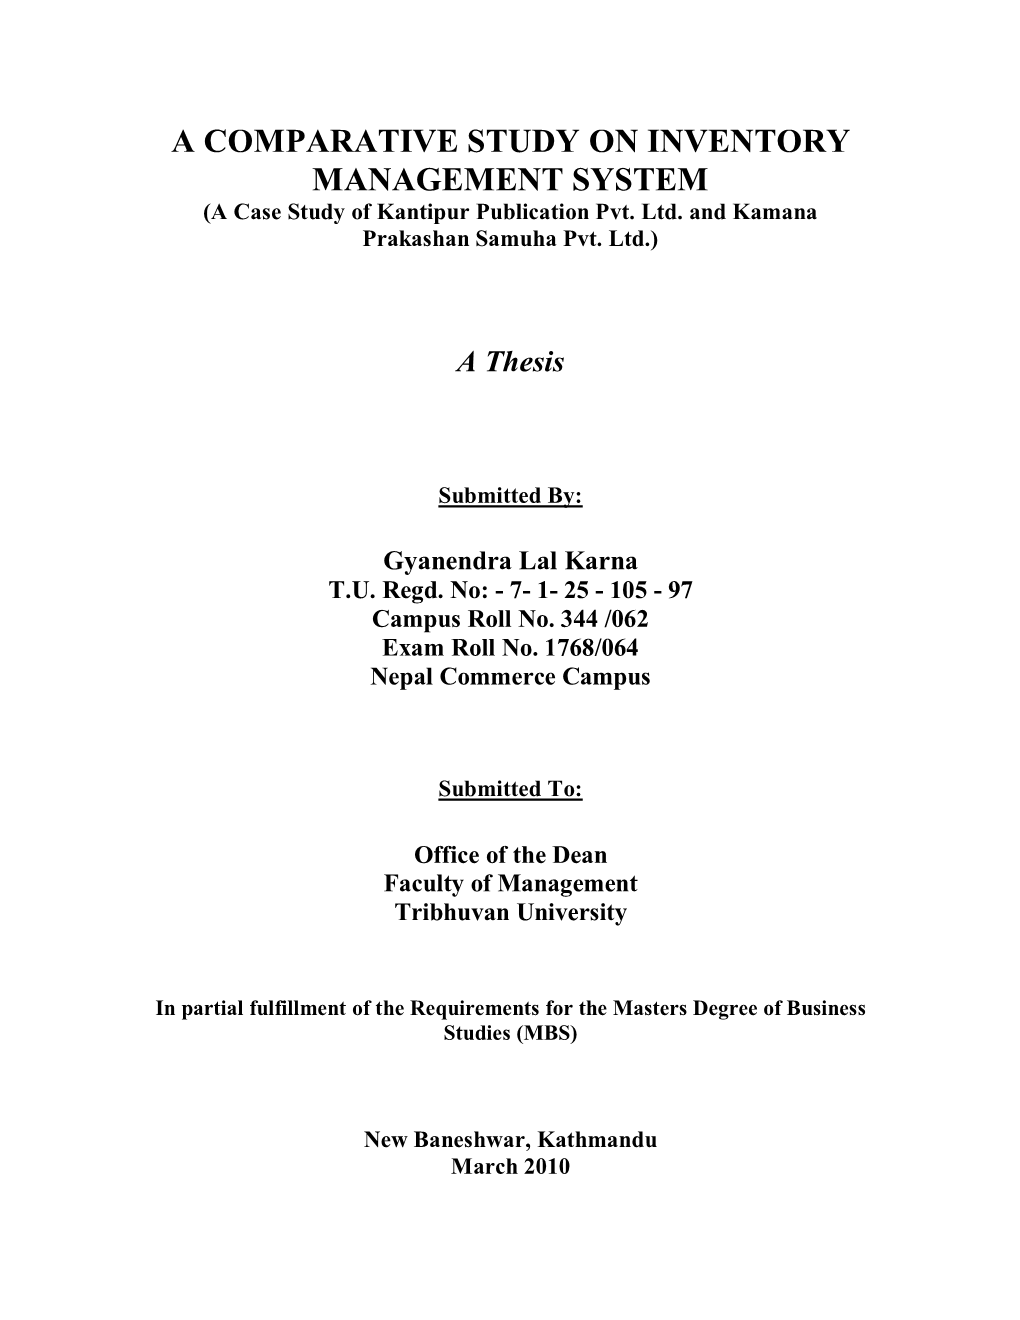 A COMPARATIVE STUDY on INVENTORY MANAGEMENT SYSTEM (A Case Study of Kantipur Publication Pvt